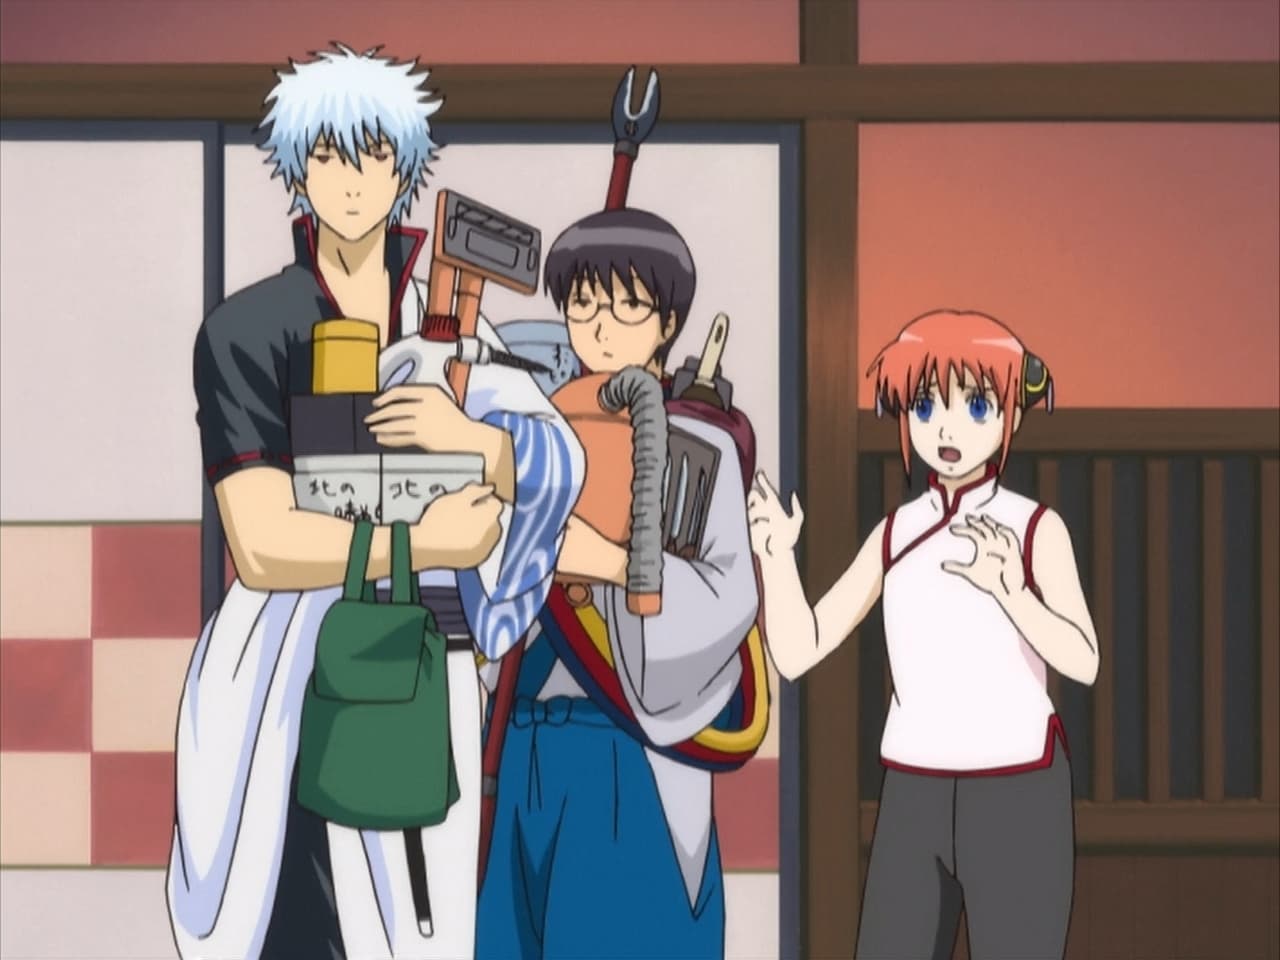 Gintama - Season 1 Episode 29 : Don’t Panic – There’s a Return Policy! / I Told You to Pay Attention to the News!